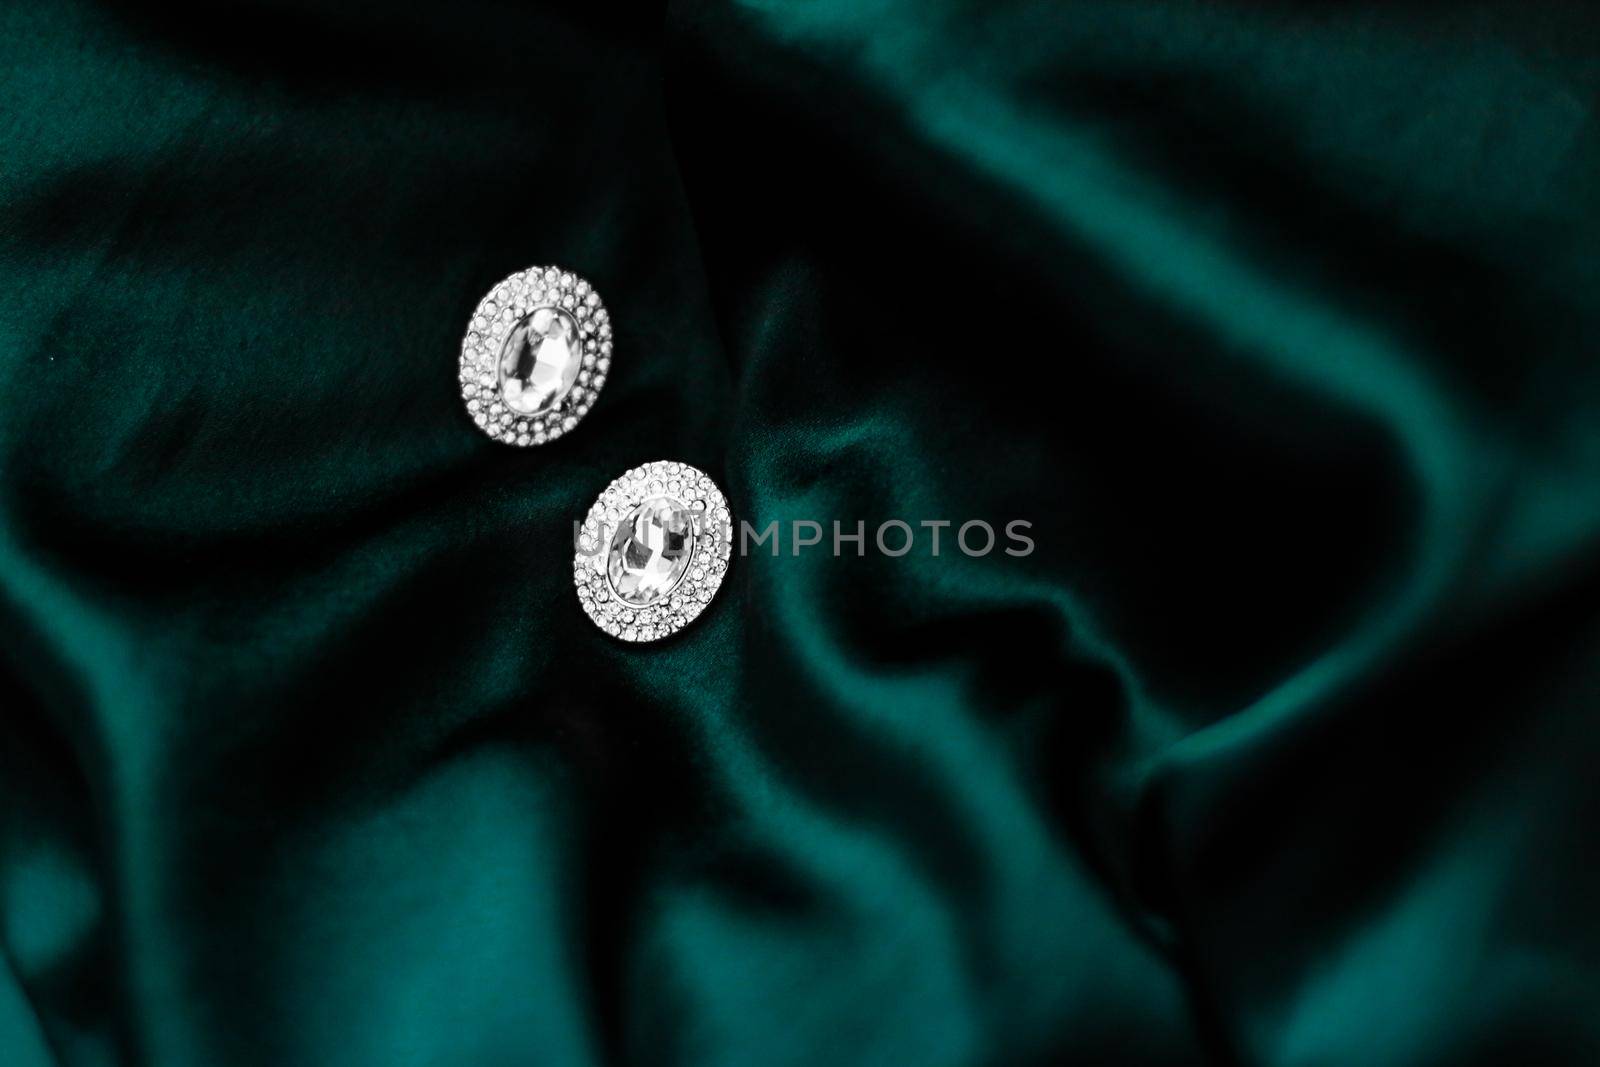 Jewellery brand, elegant fashion and bridal luxe gift concept - Luxury diamond earrings on dark emerald green silk, holiday glamour jewelery present